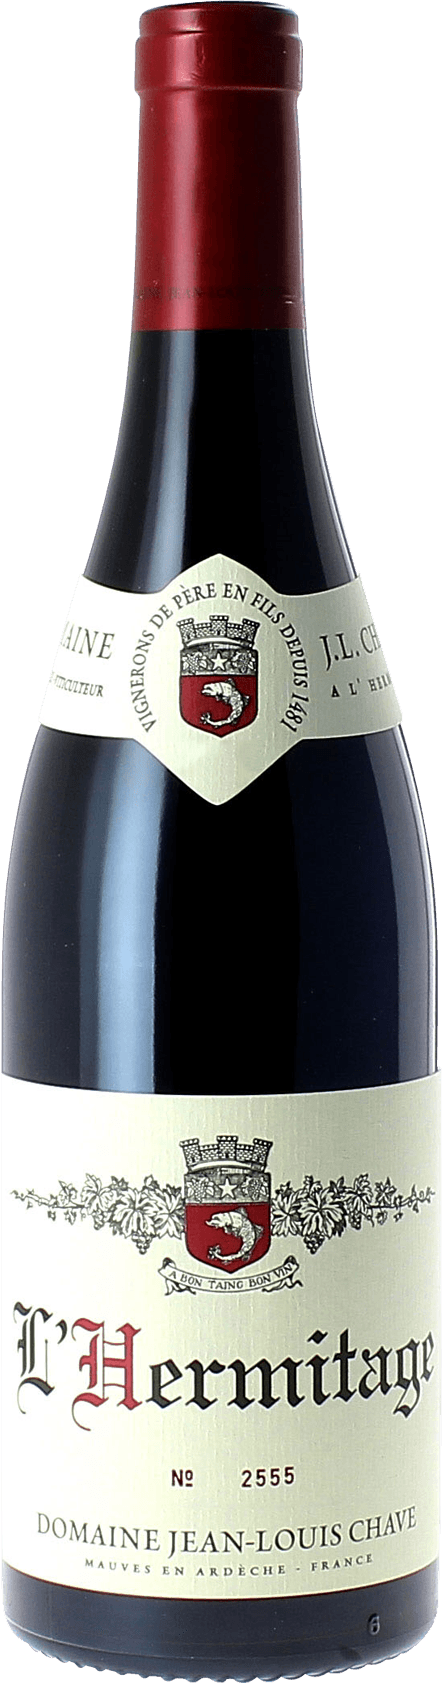 Hermitage rouge jean-louis chave 2004  Hermitage, Valle du Rhne Rouge